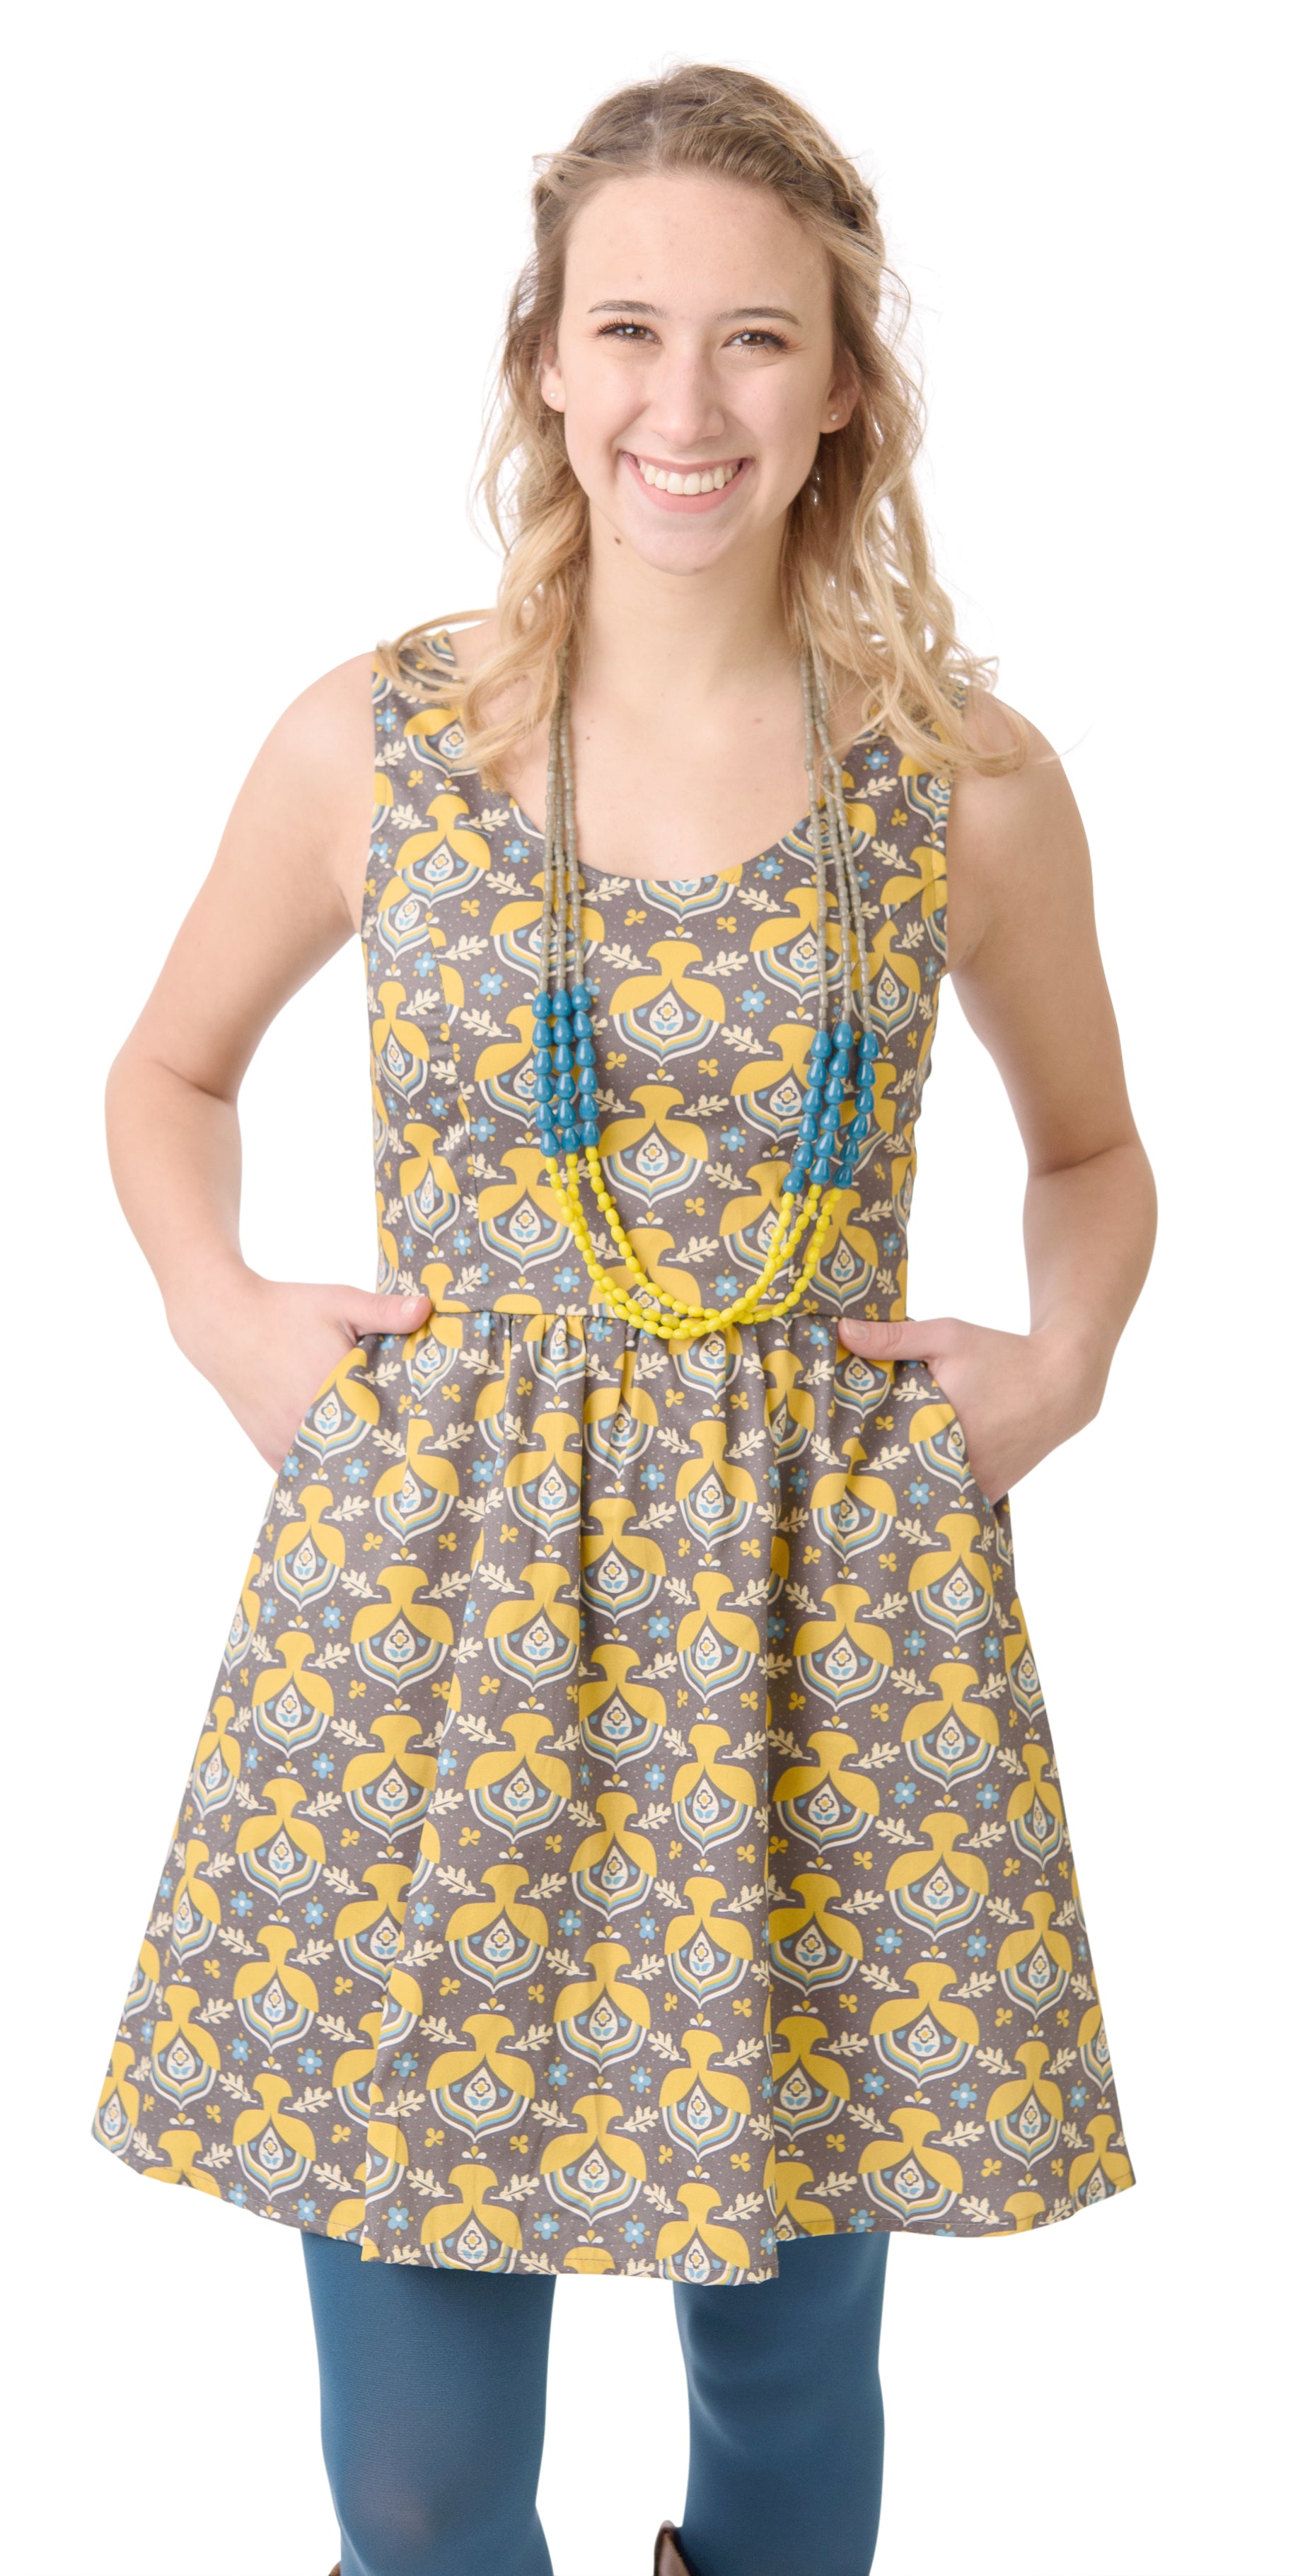 Grey cotton poplin fit and flare knee length dress with bright yellow, aqua  and yellow acorn print